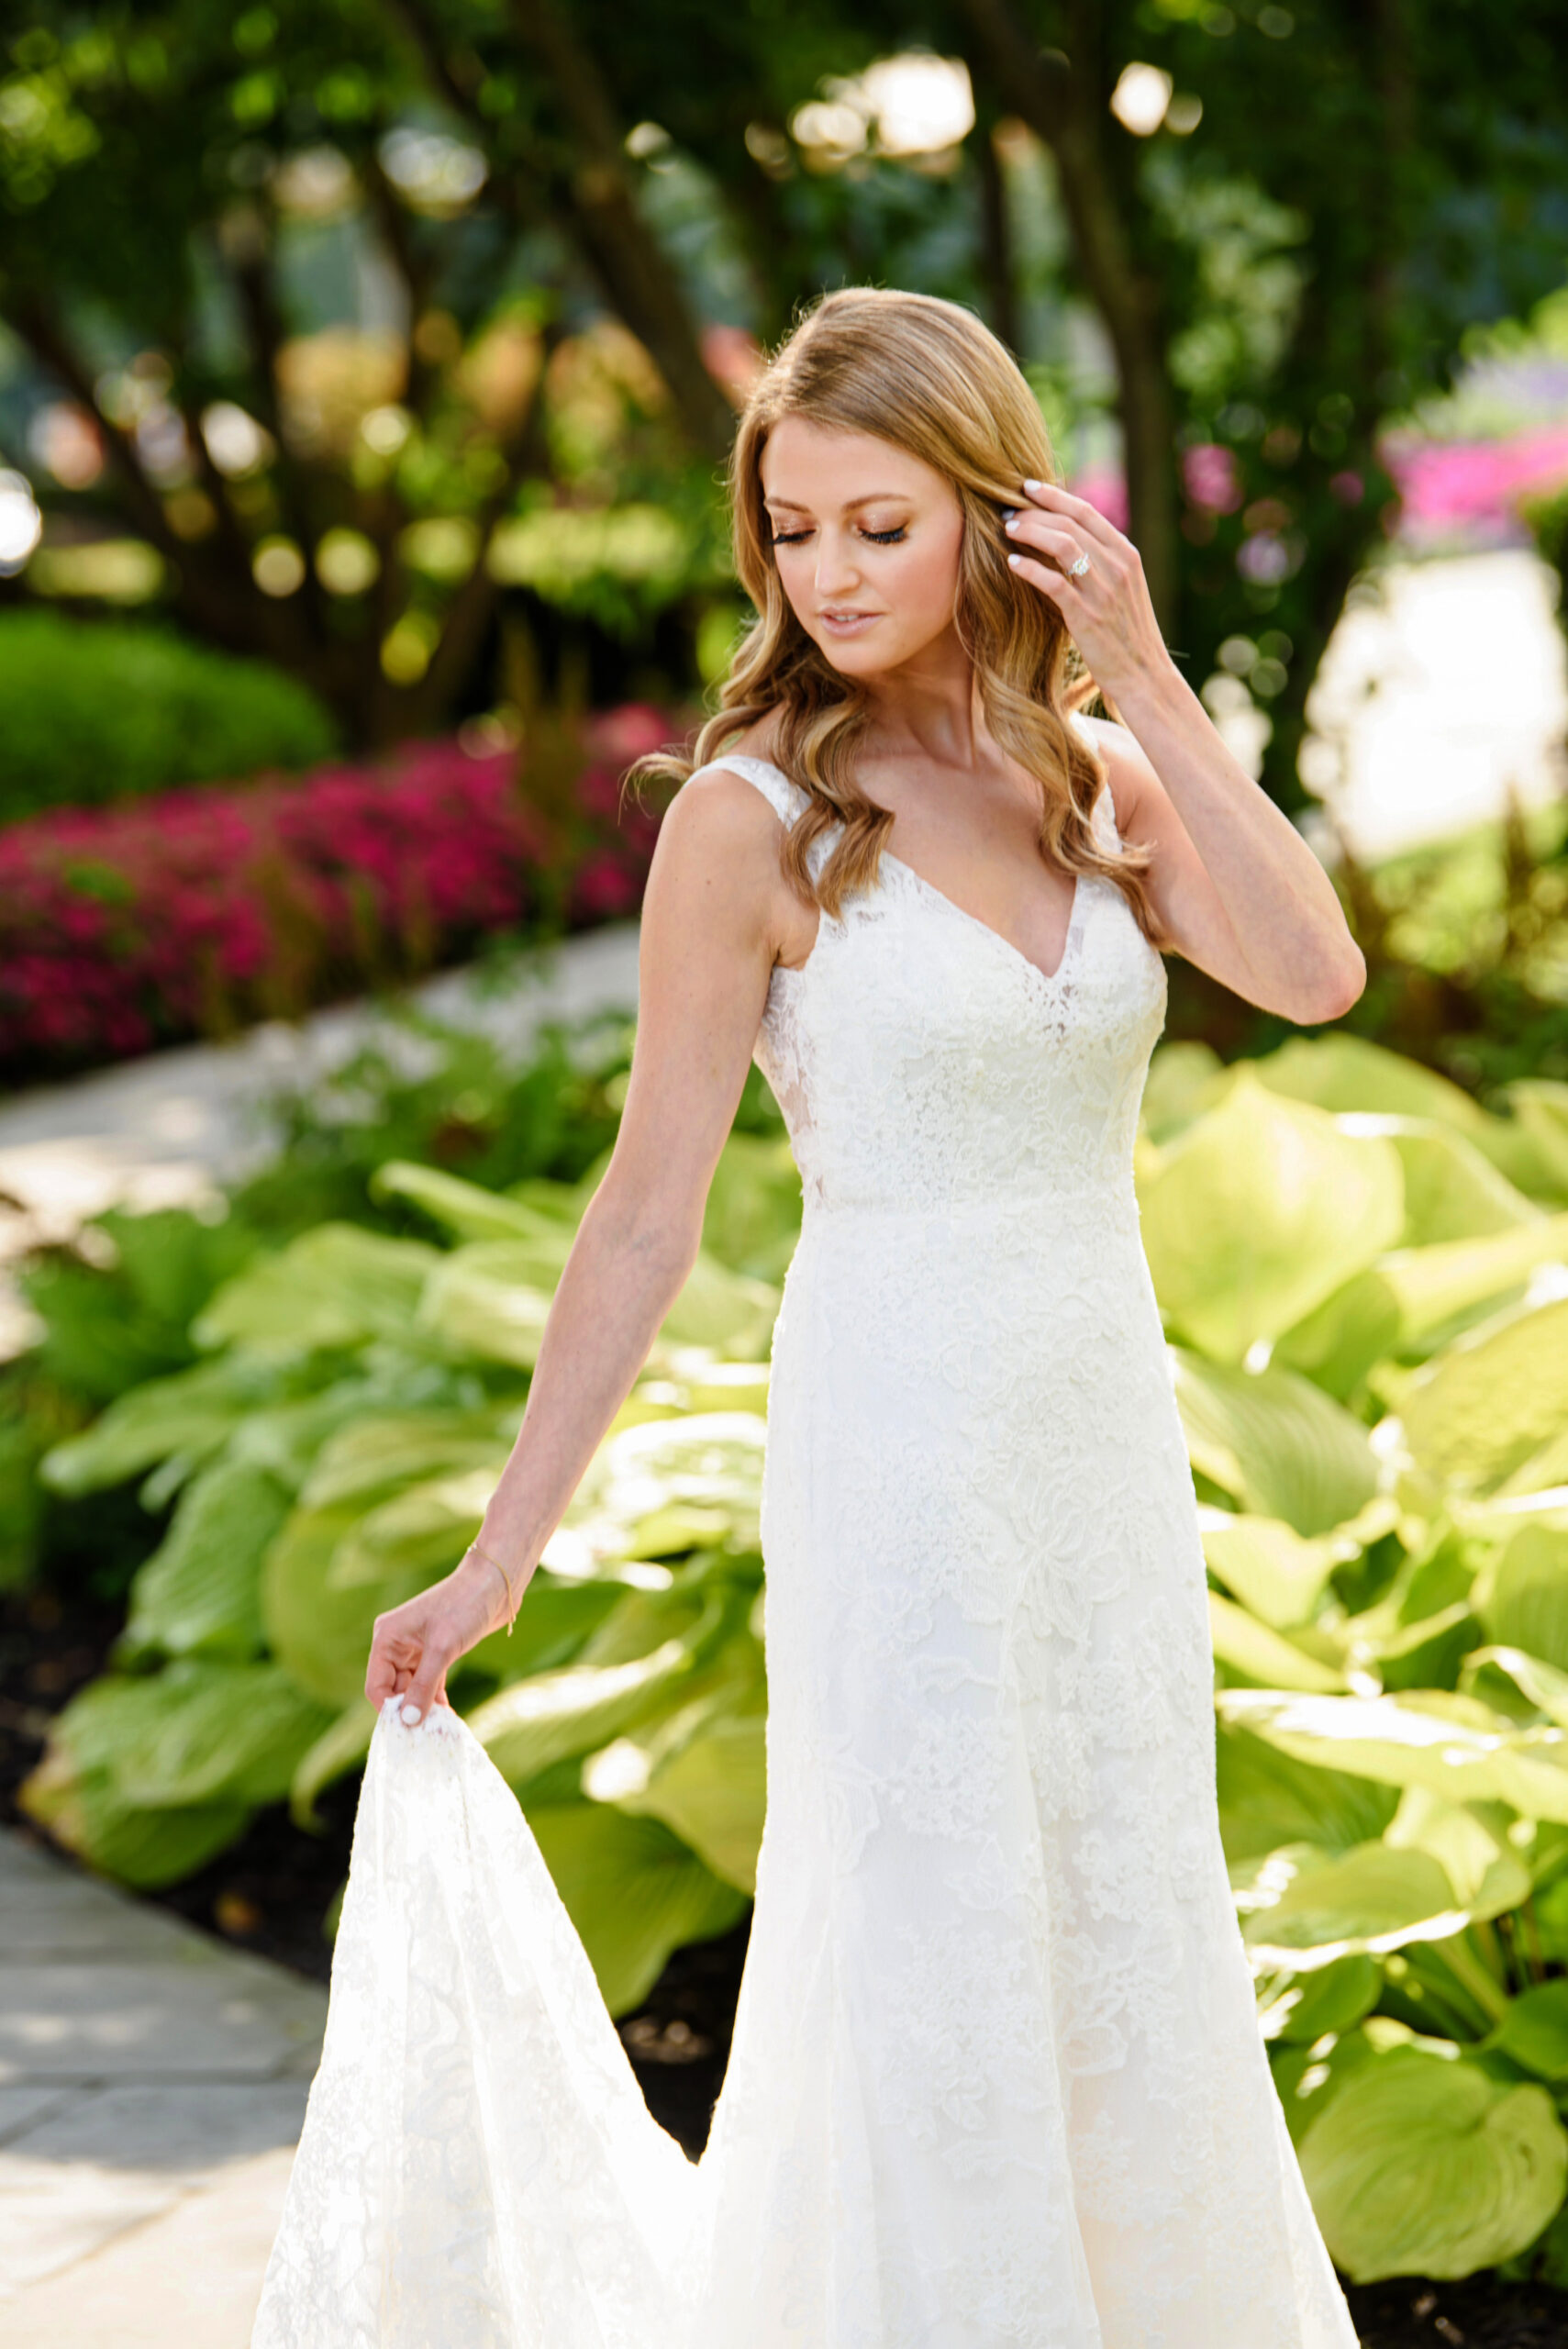 A beautiful bride walking on a cement path